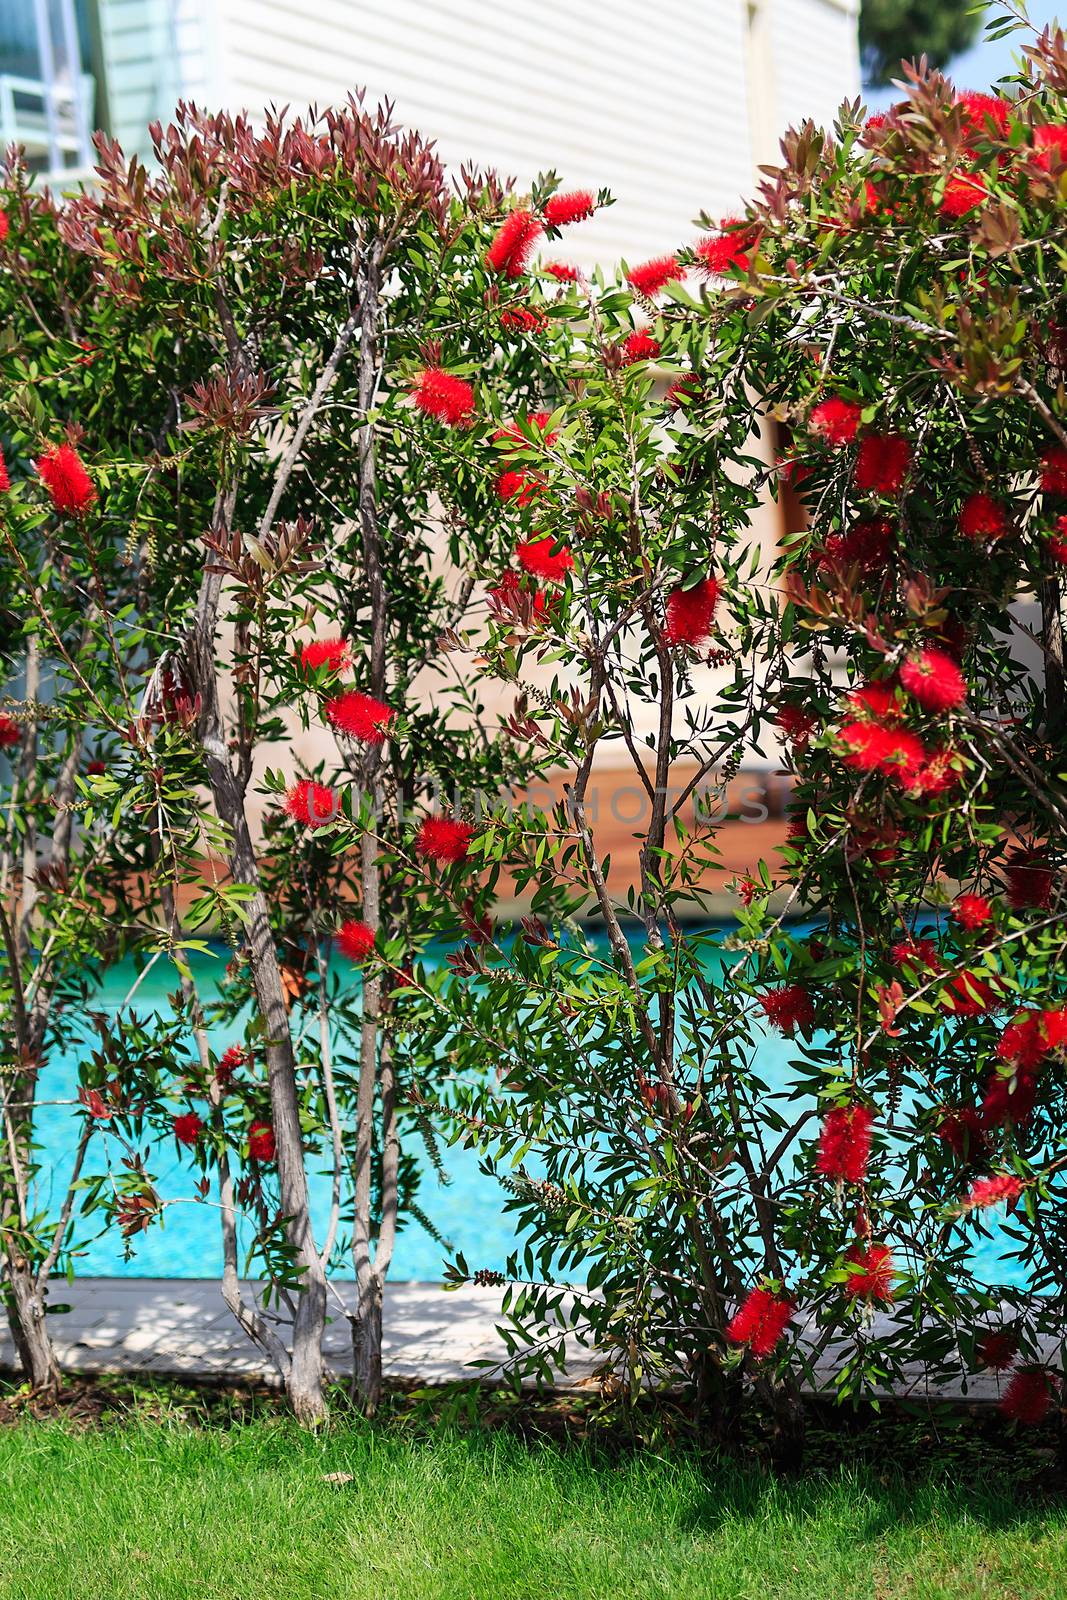 red flowers on tall bushes with green leaves, hotel grounds with swimming pool and trees, summer, day by dikkens